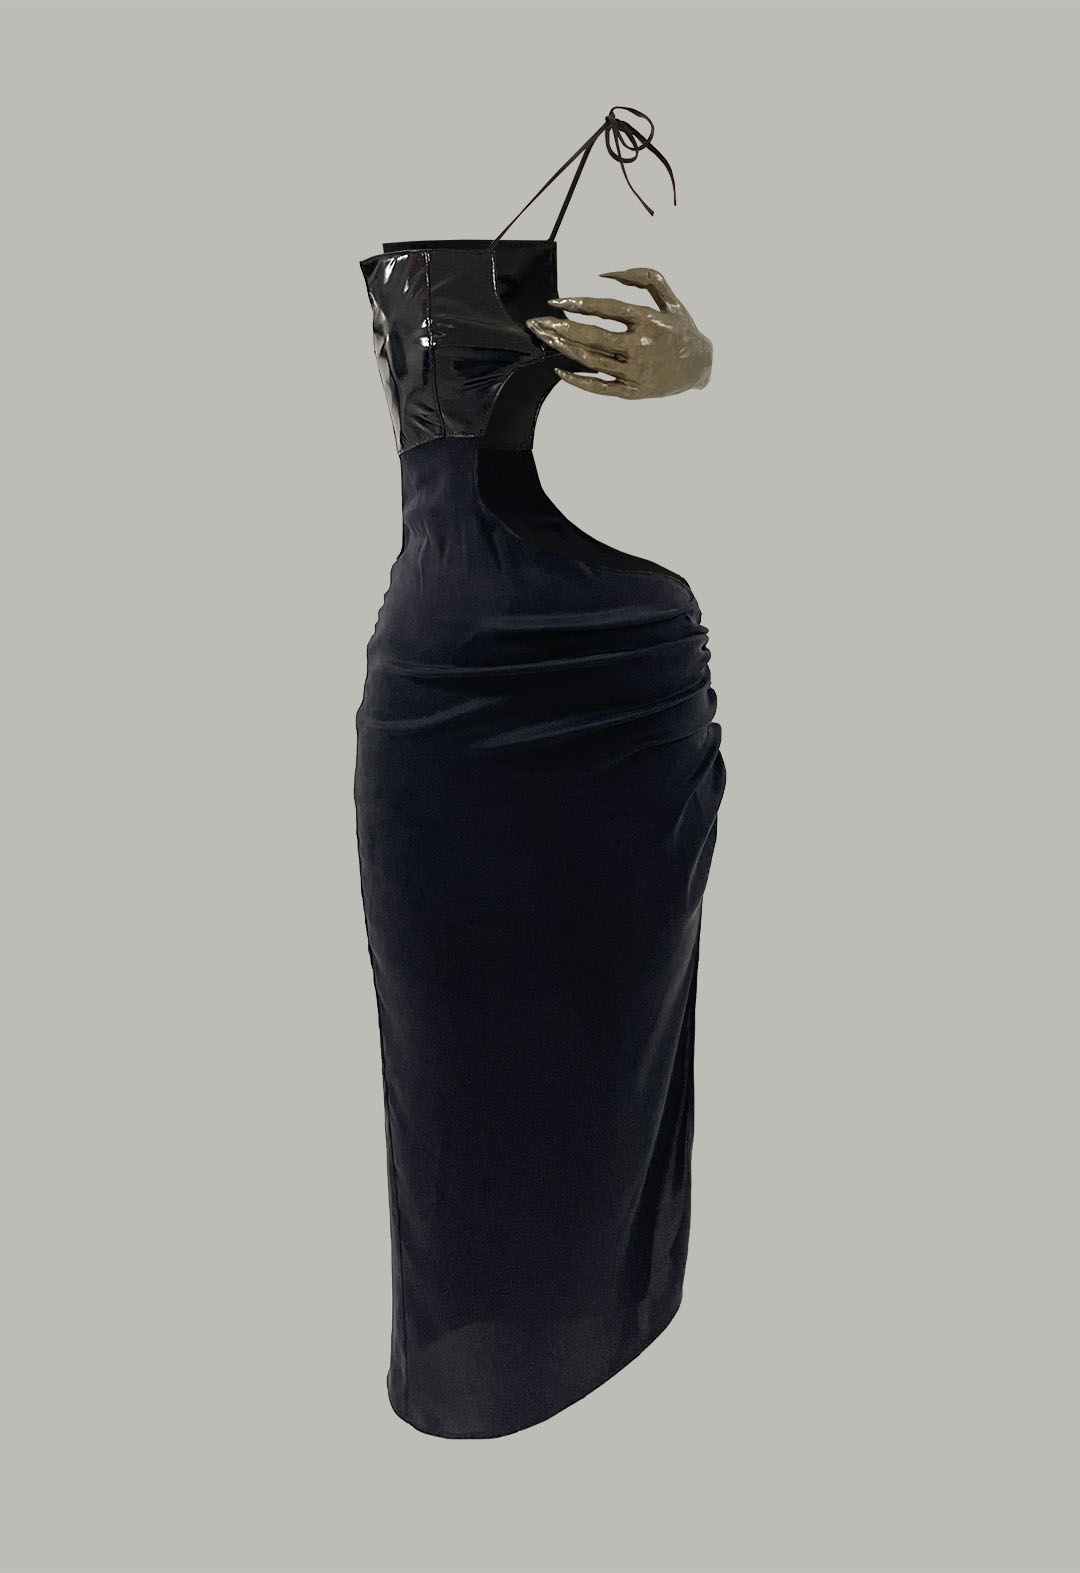 Black asymmetric dress against a light-gray background. The dress has a cutout on the right side of the waist. One strap comes from the bodice and ties diagonally over the shoulder. The bodice of the dress is shiny while the skirt is matte. There is a metallic gold sculpted hand attached to the bodice on the right side at the bust. 